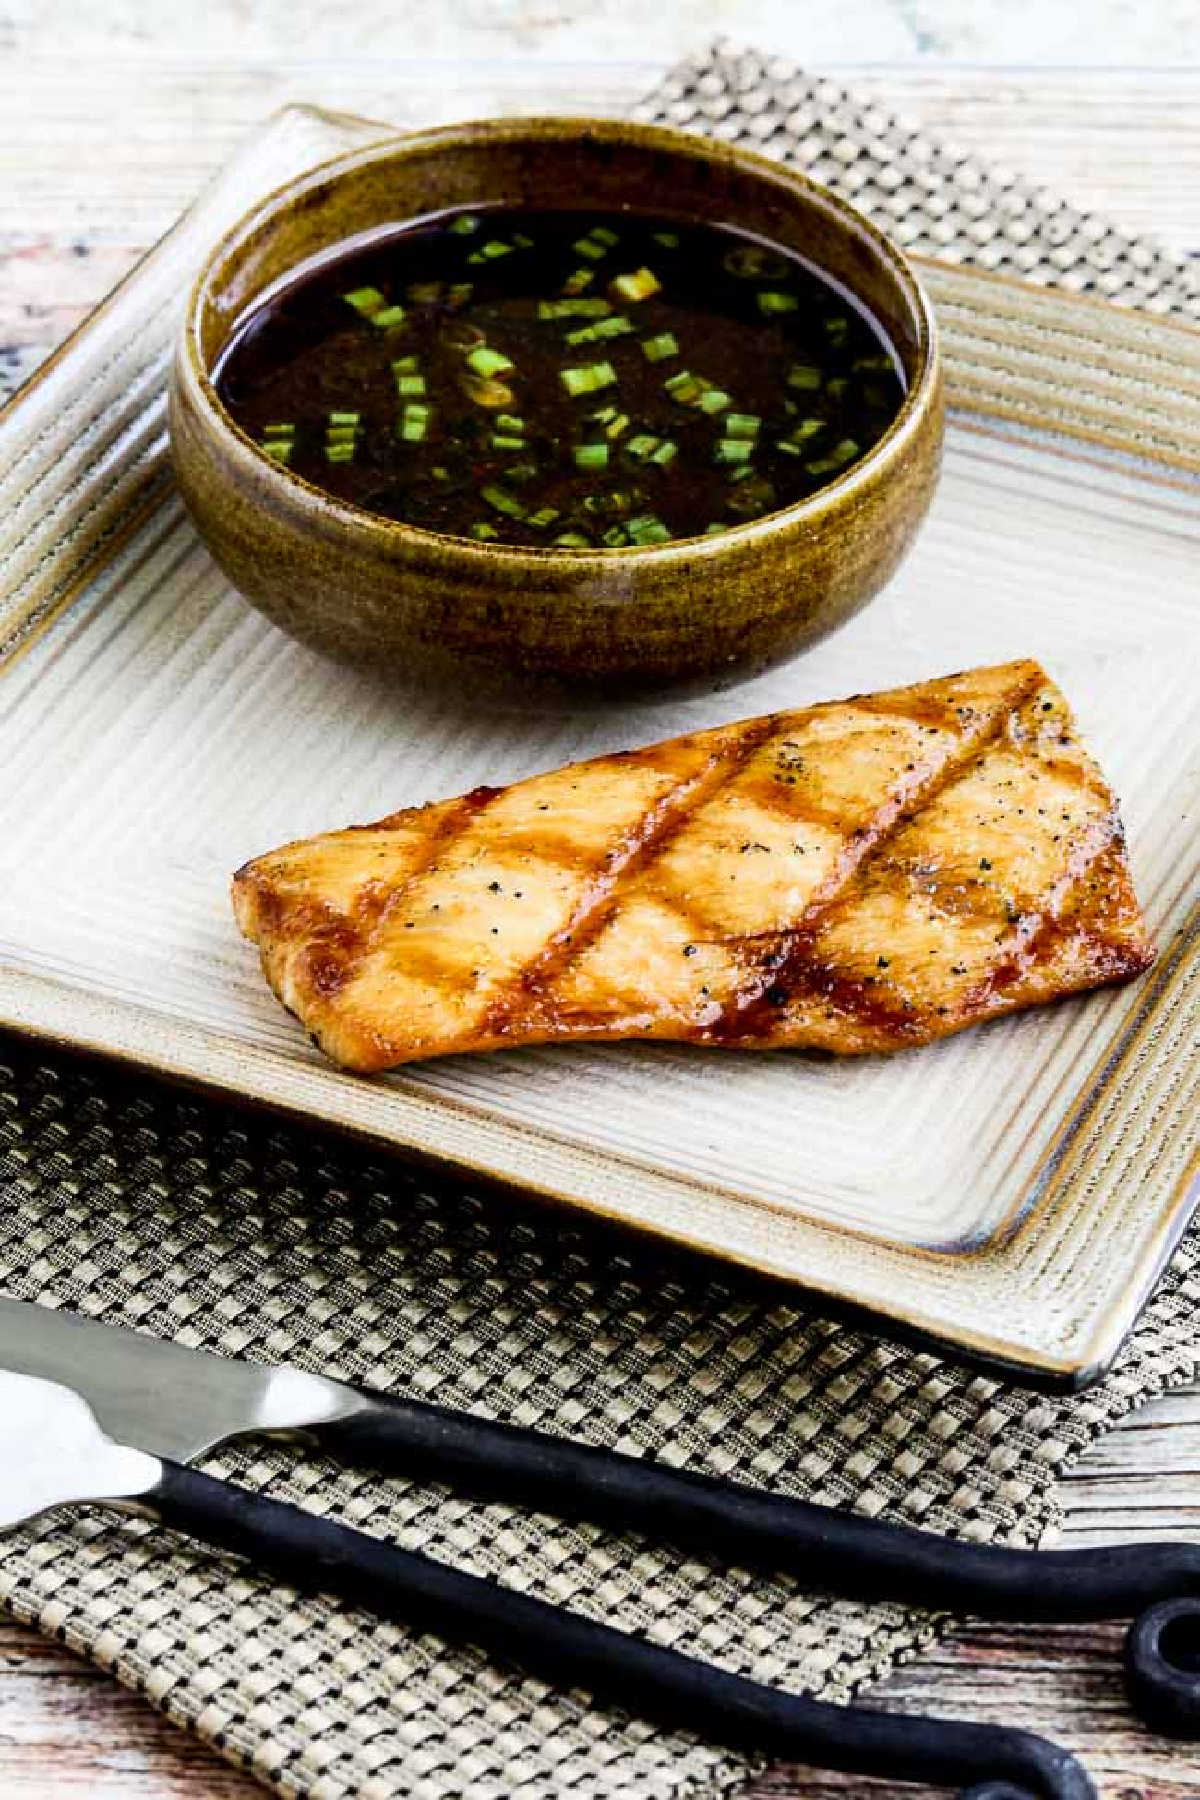 Grilled Mahi Mahi with Korean Dipping Sauce shown on serving plate with sauce